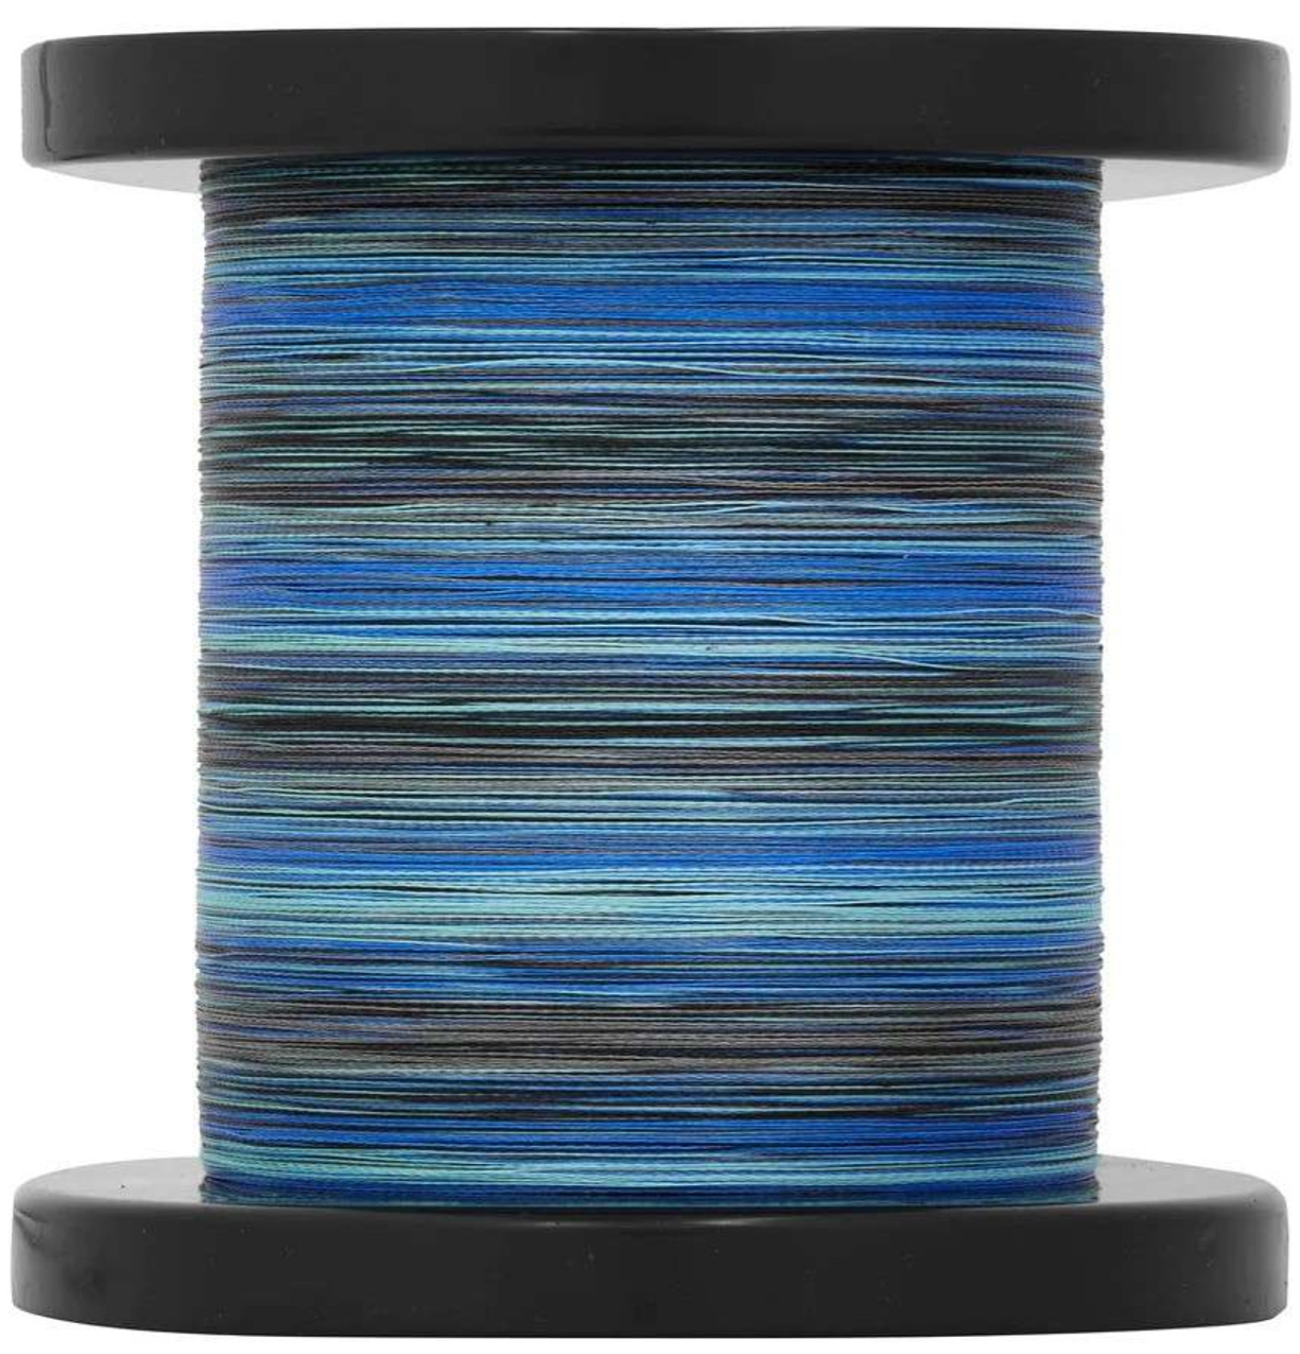 Berkley Pro Spec Multi-Coloured Braided Fishing Line - 100% Dyneema Braid  with 5 Alternating Colours every 10m - For Saltwater Fishing, Boat & Kayak